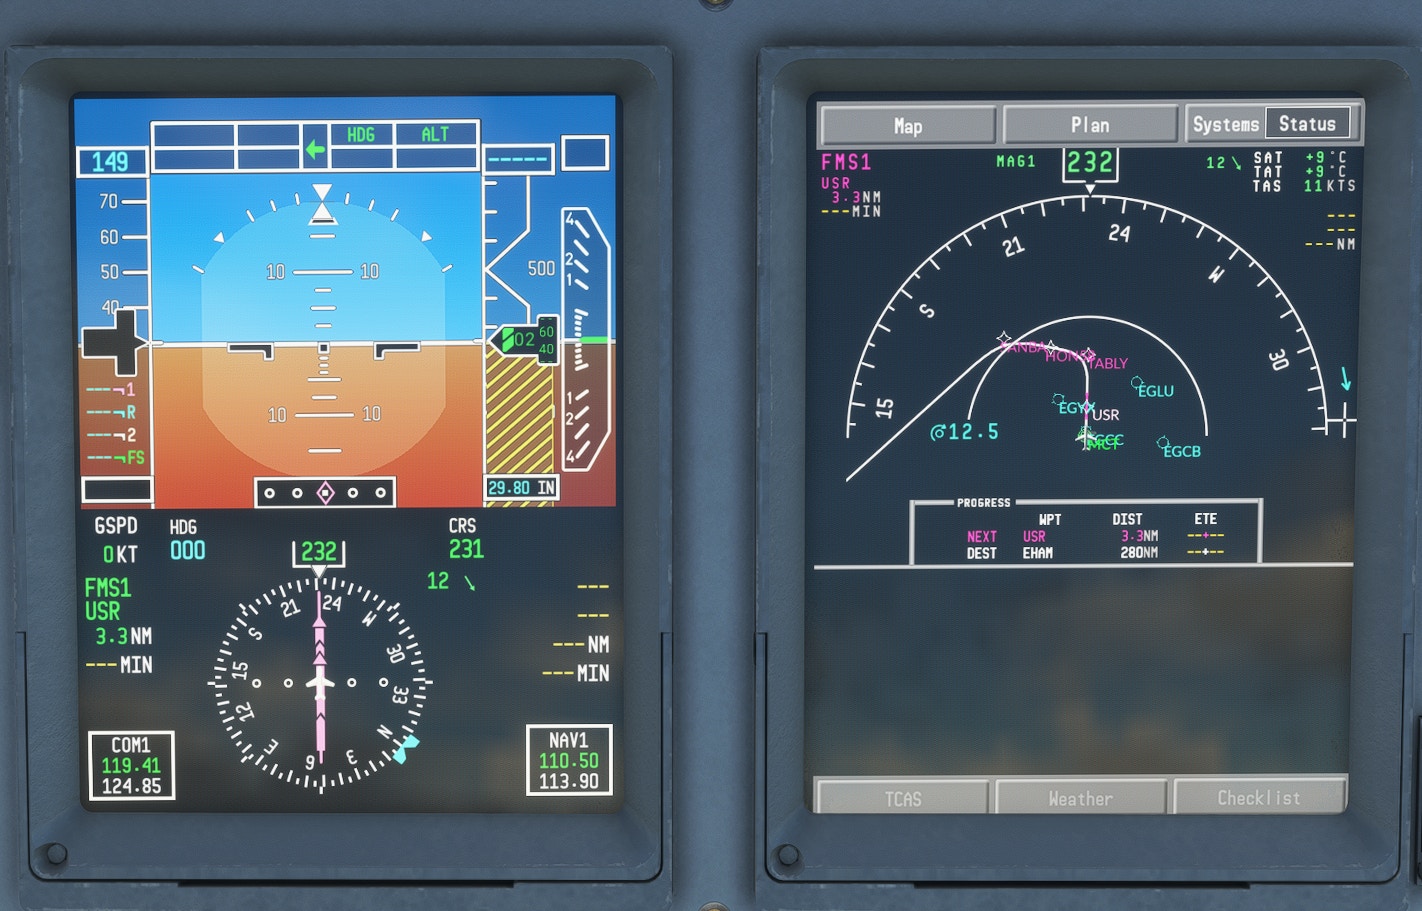 Review: FlightSim Studio Embraer 175 Early Access